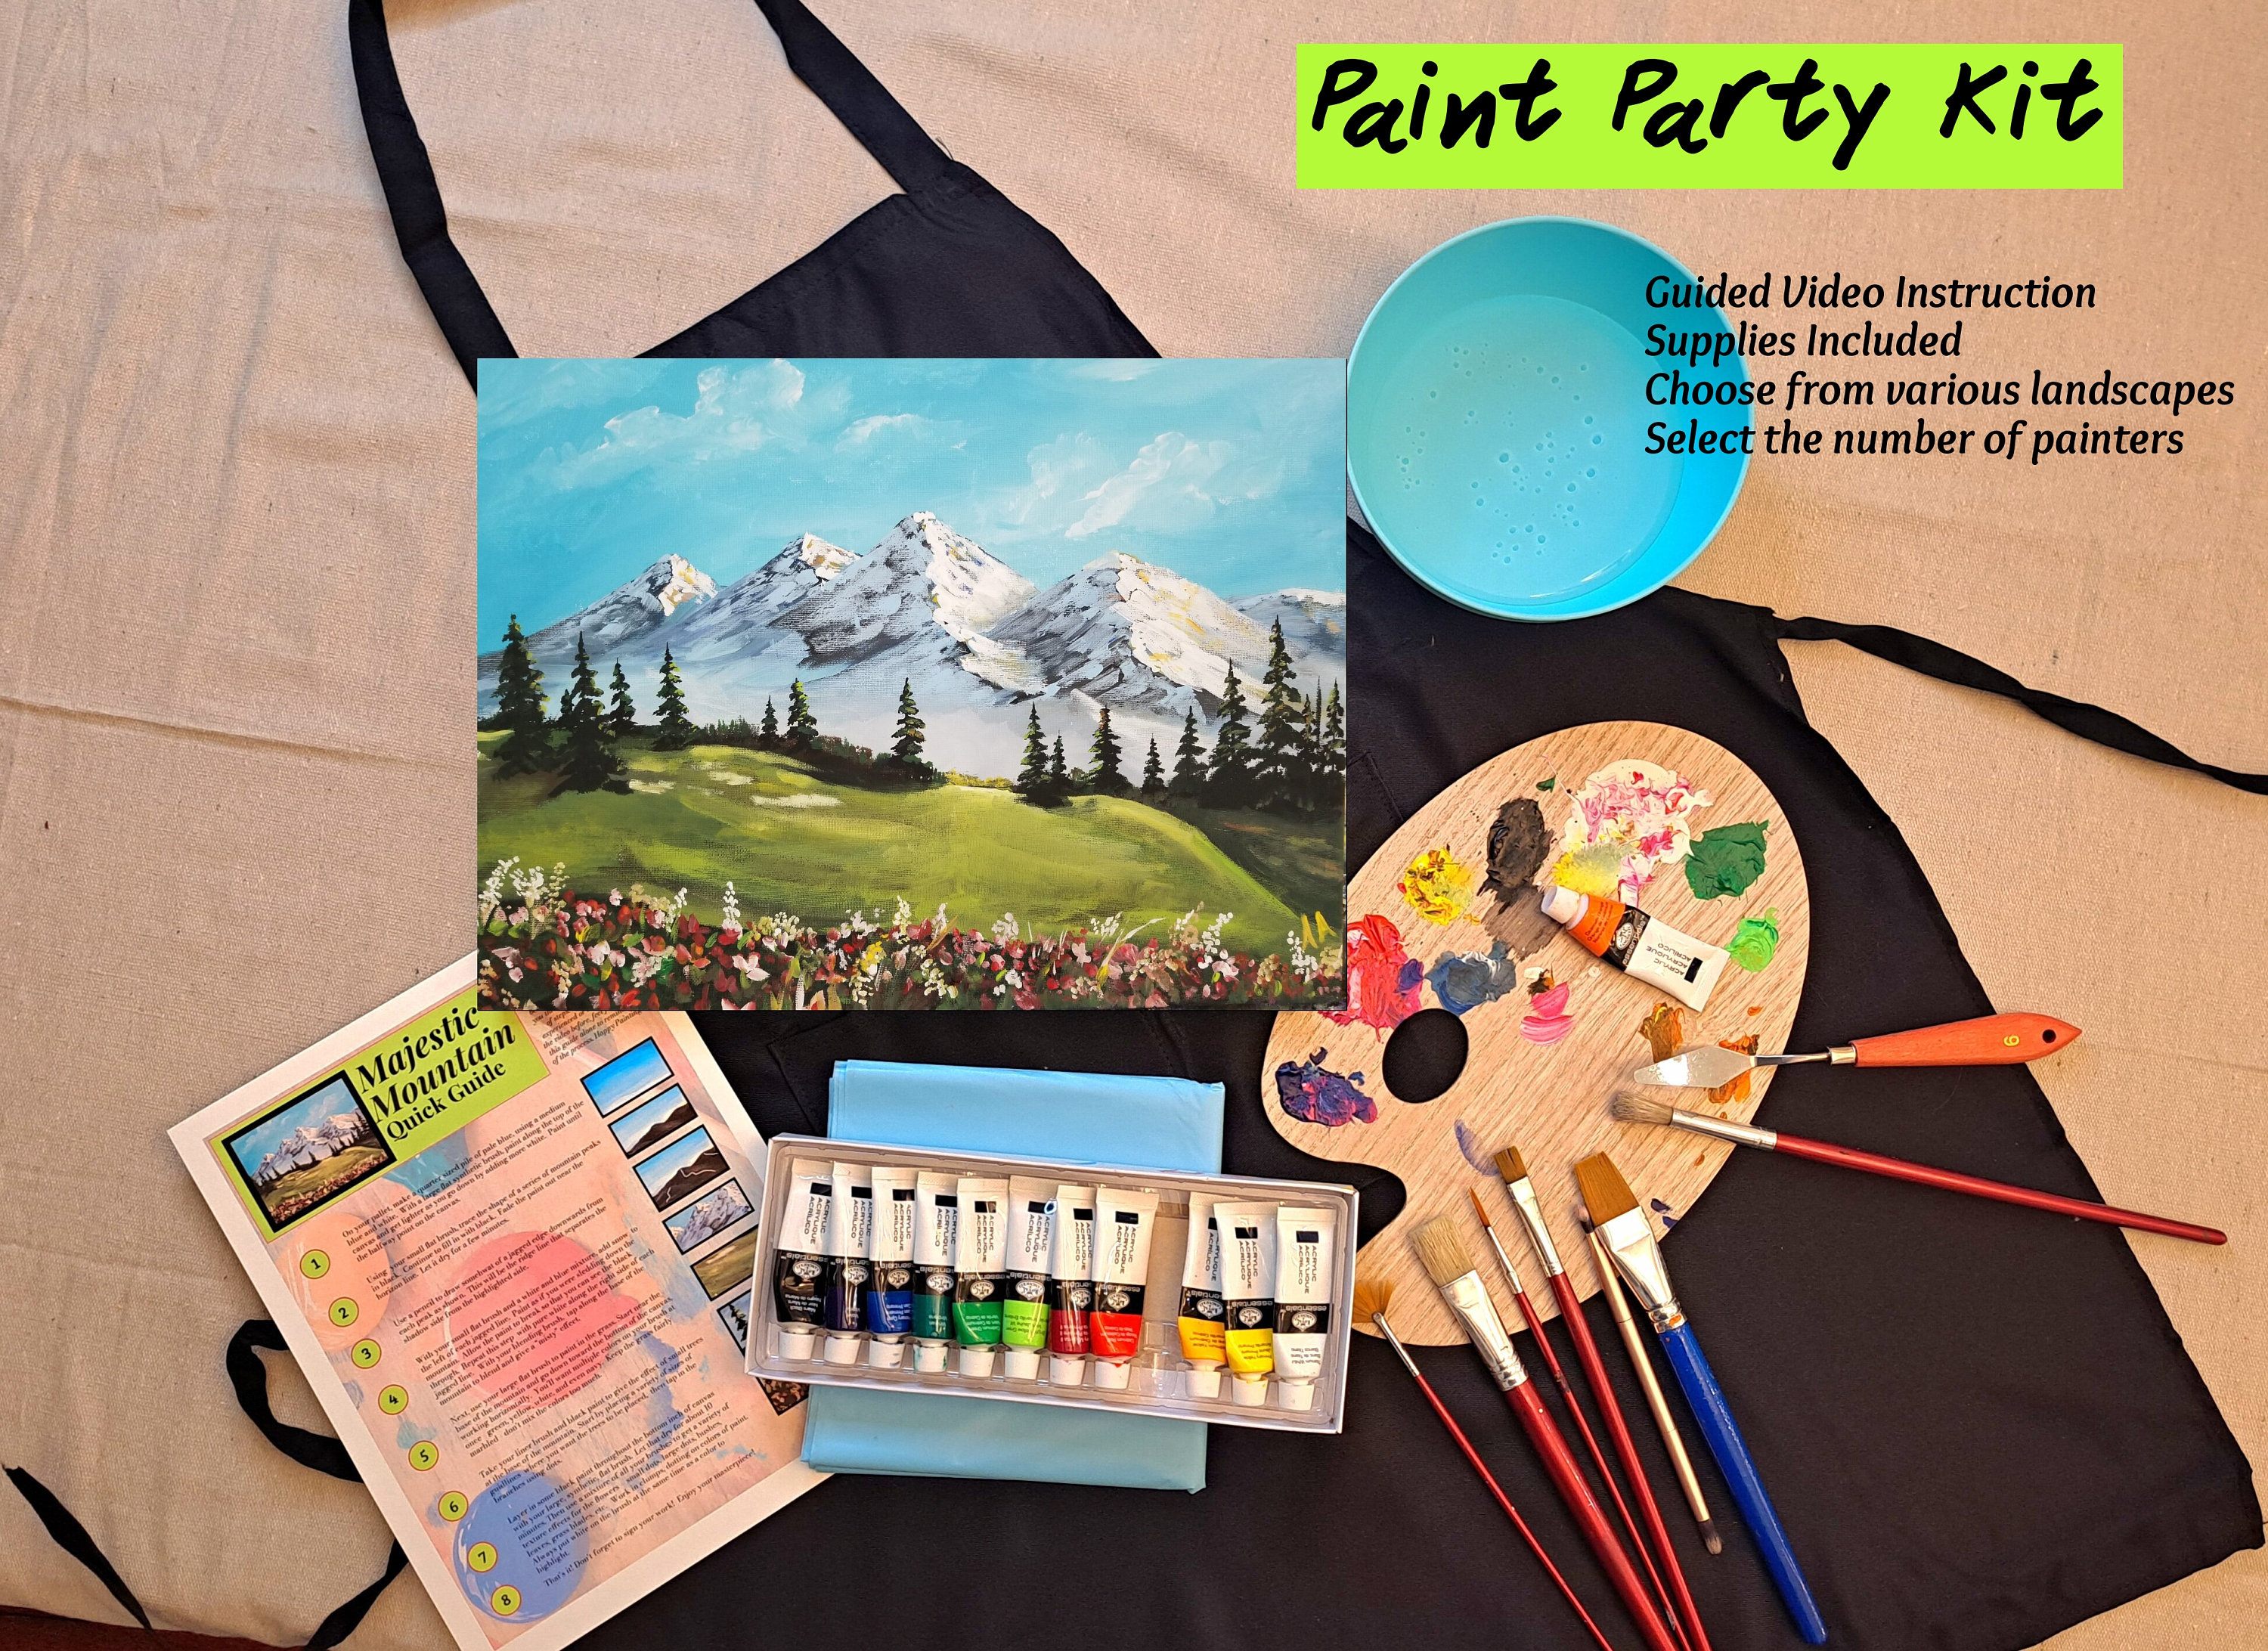 Paint Party Kit, Group Painting, Date Night Painting, Paint Tutorial Kit,  Paint Night, Paint Kit , Landscape Painting Kit 